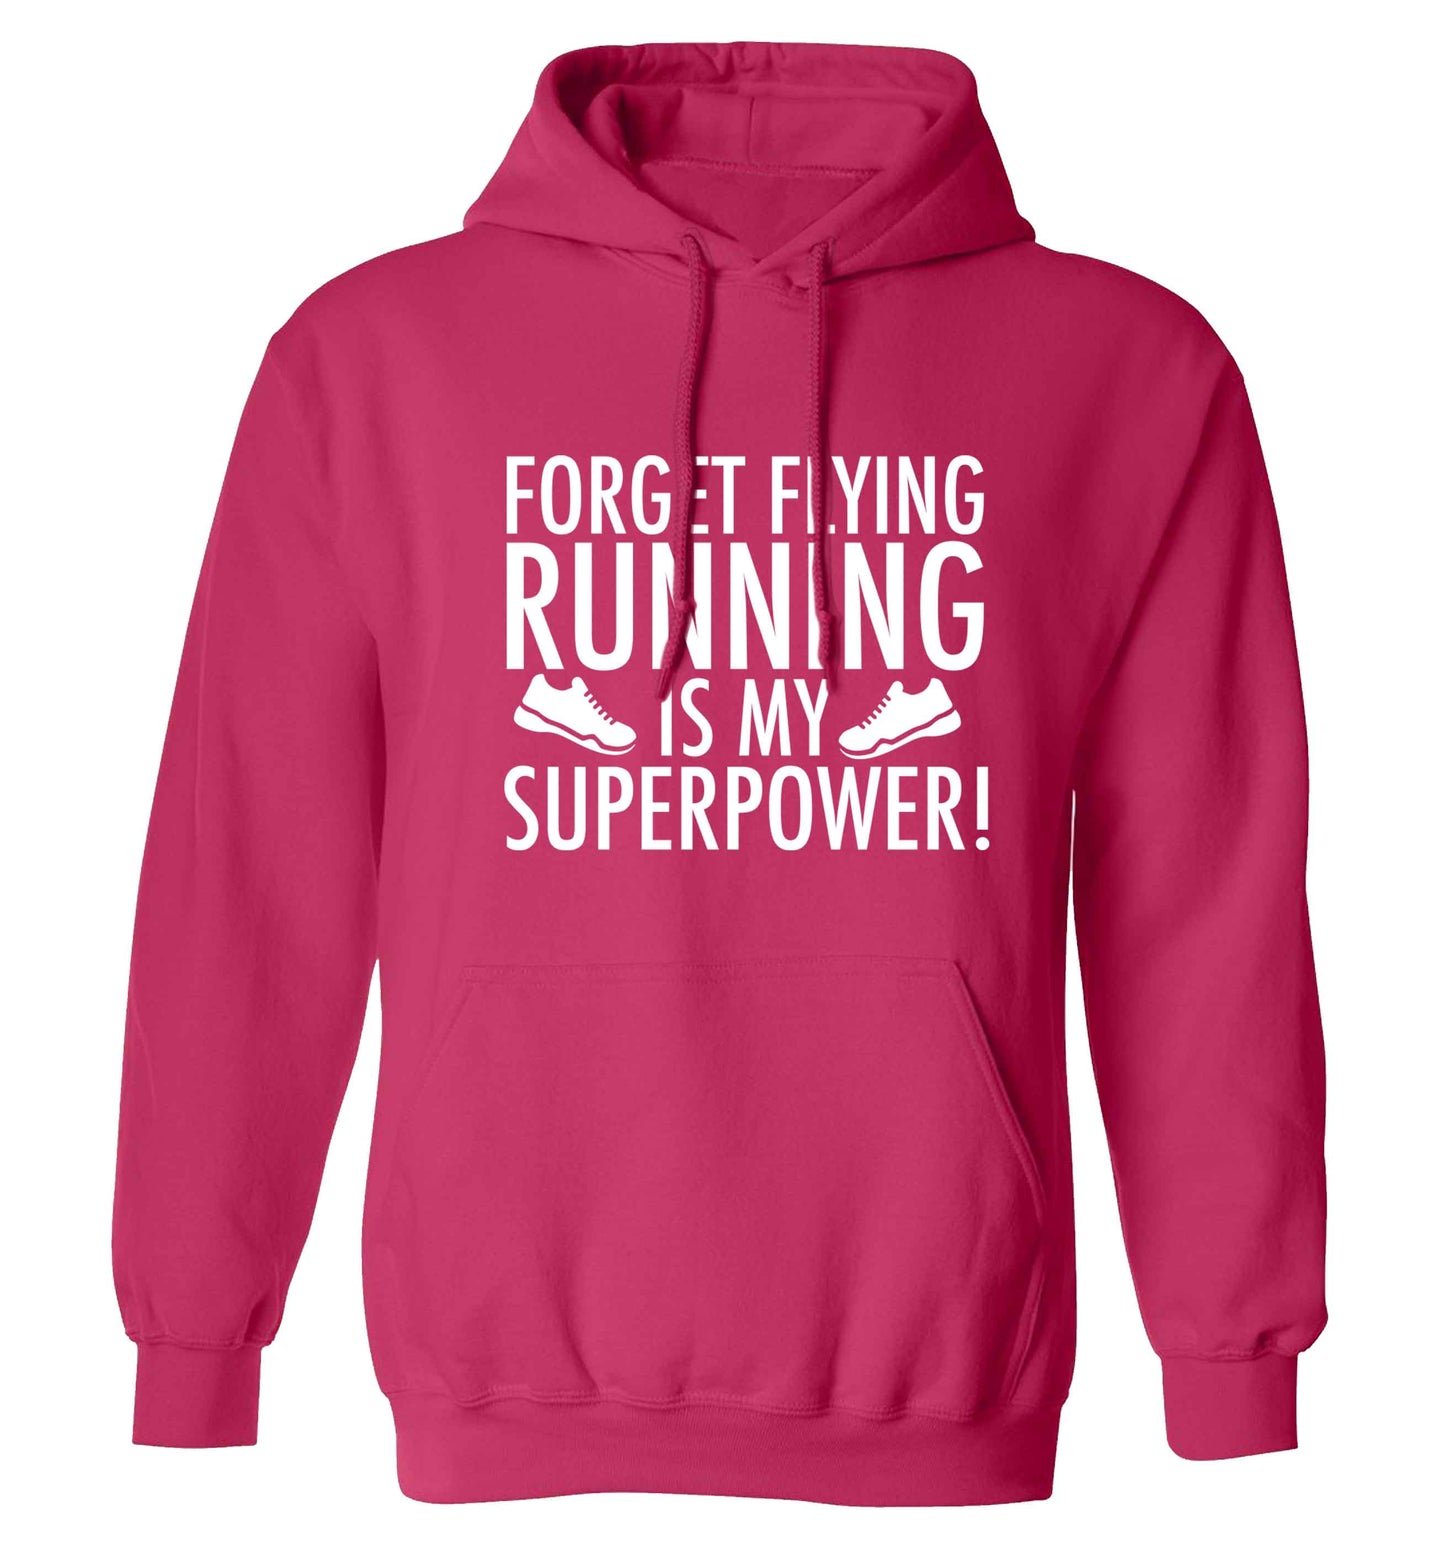 Crazy running dude adults unisex pink hoodie 2XL